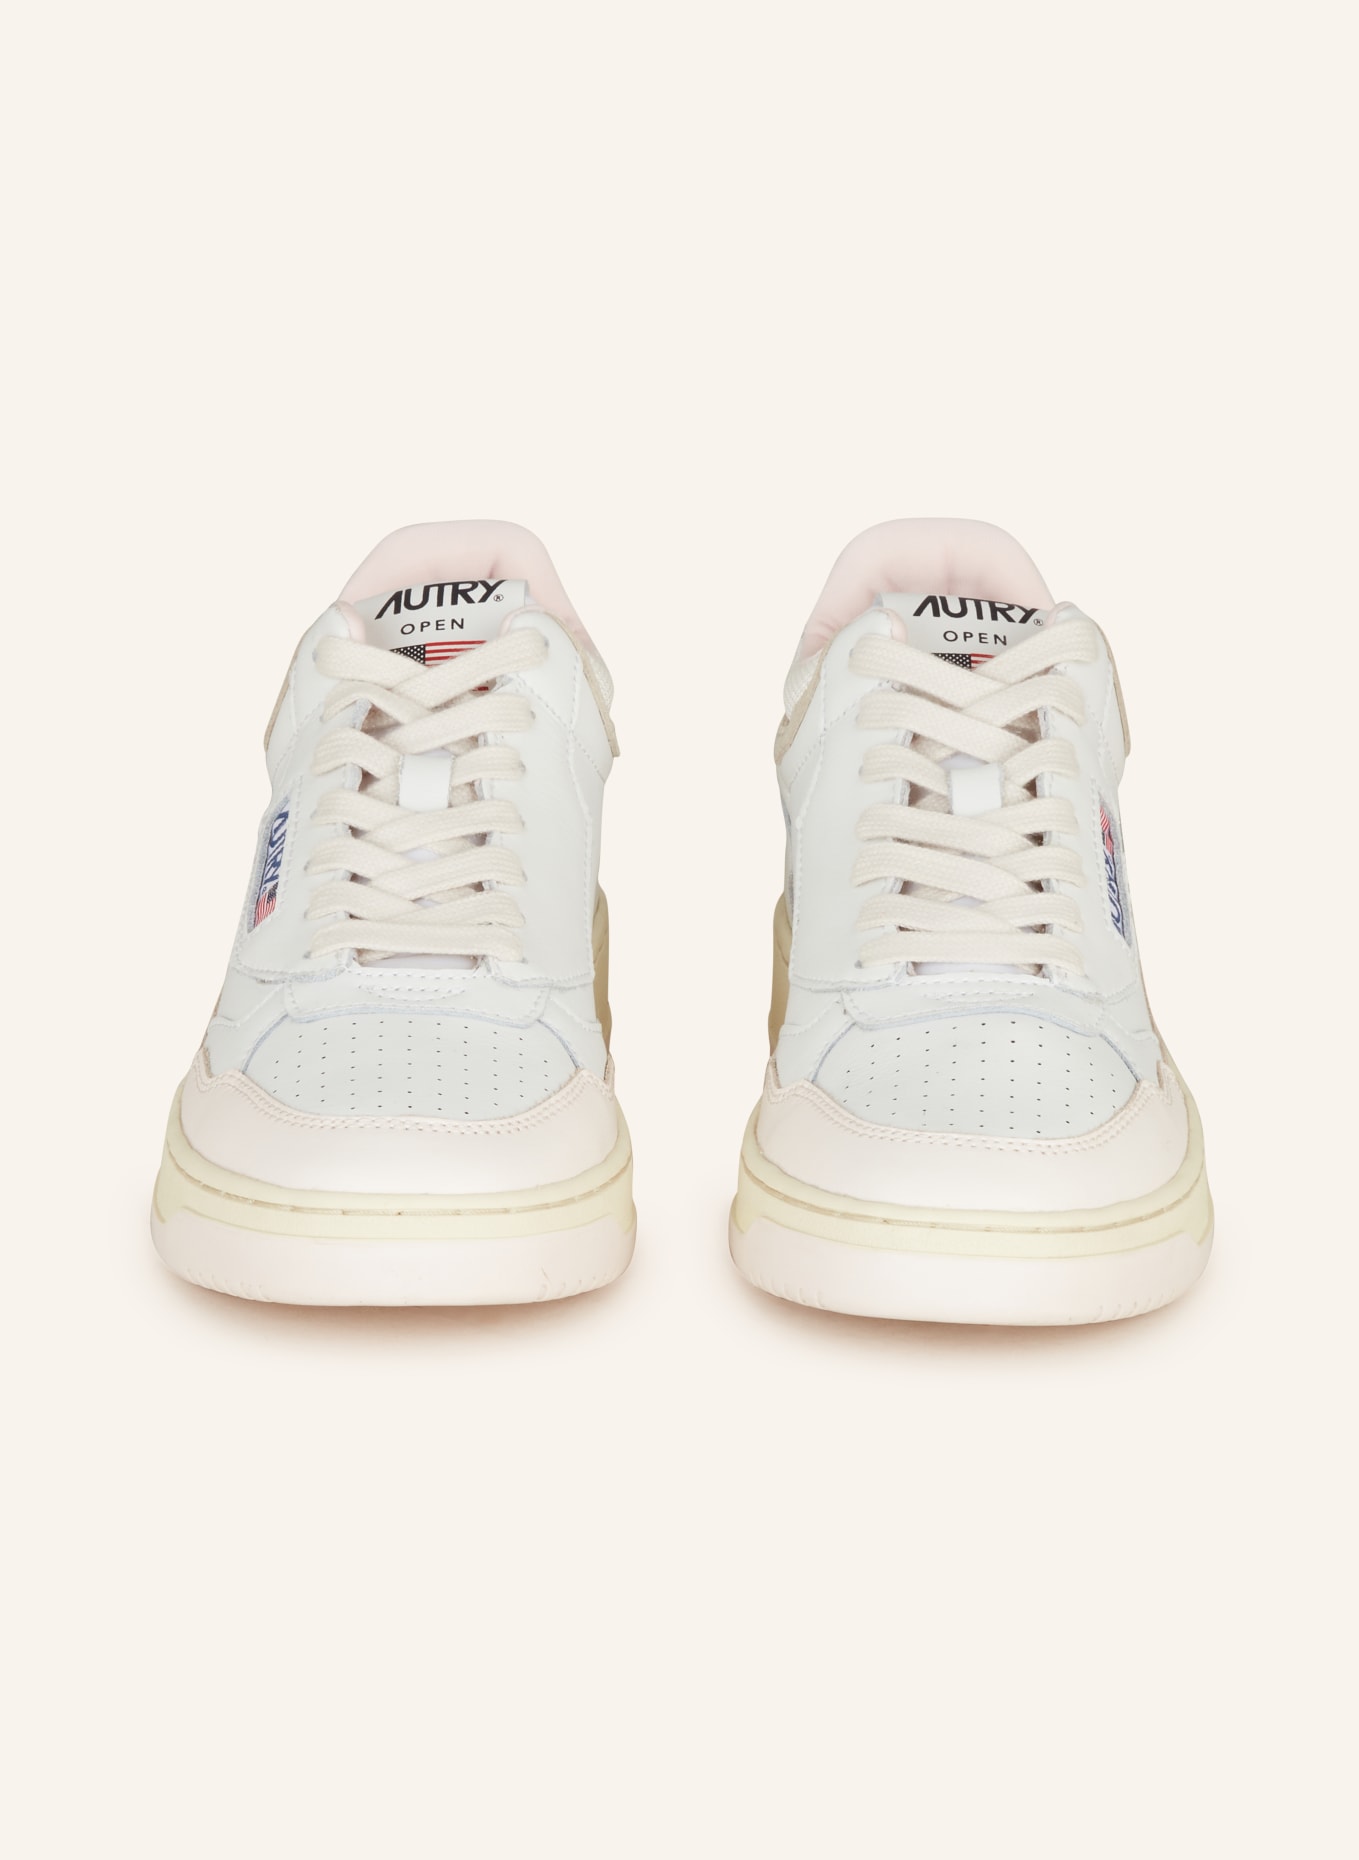 AUTRY High-top sneakers OPEN, Color: WHITE/ LIGHT PINK/ LIGHT YELLOW (Image 3)